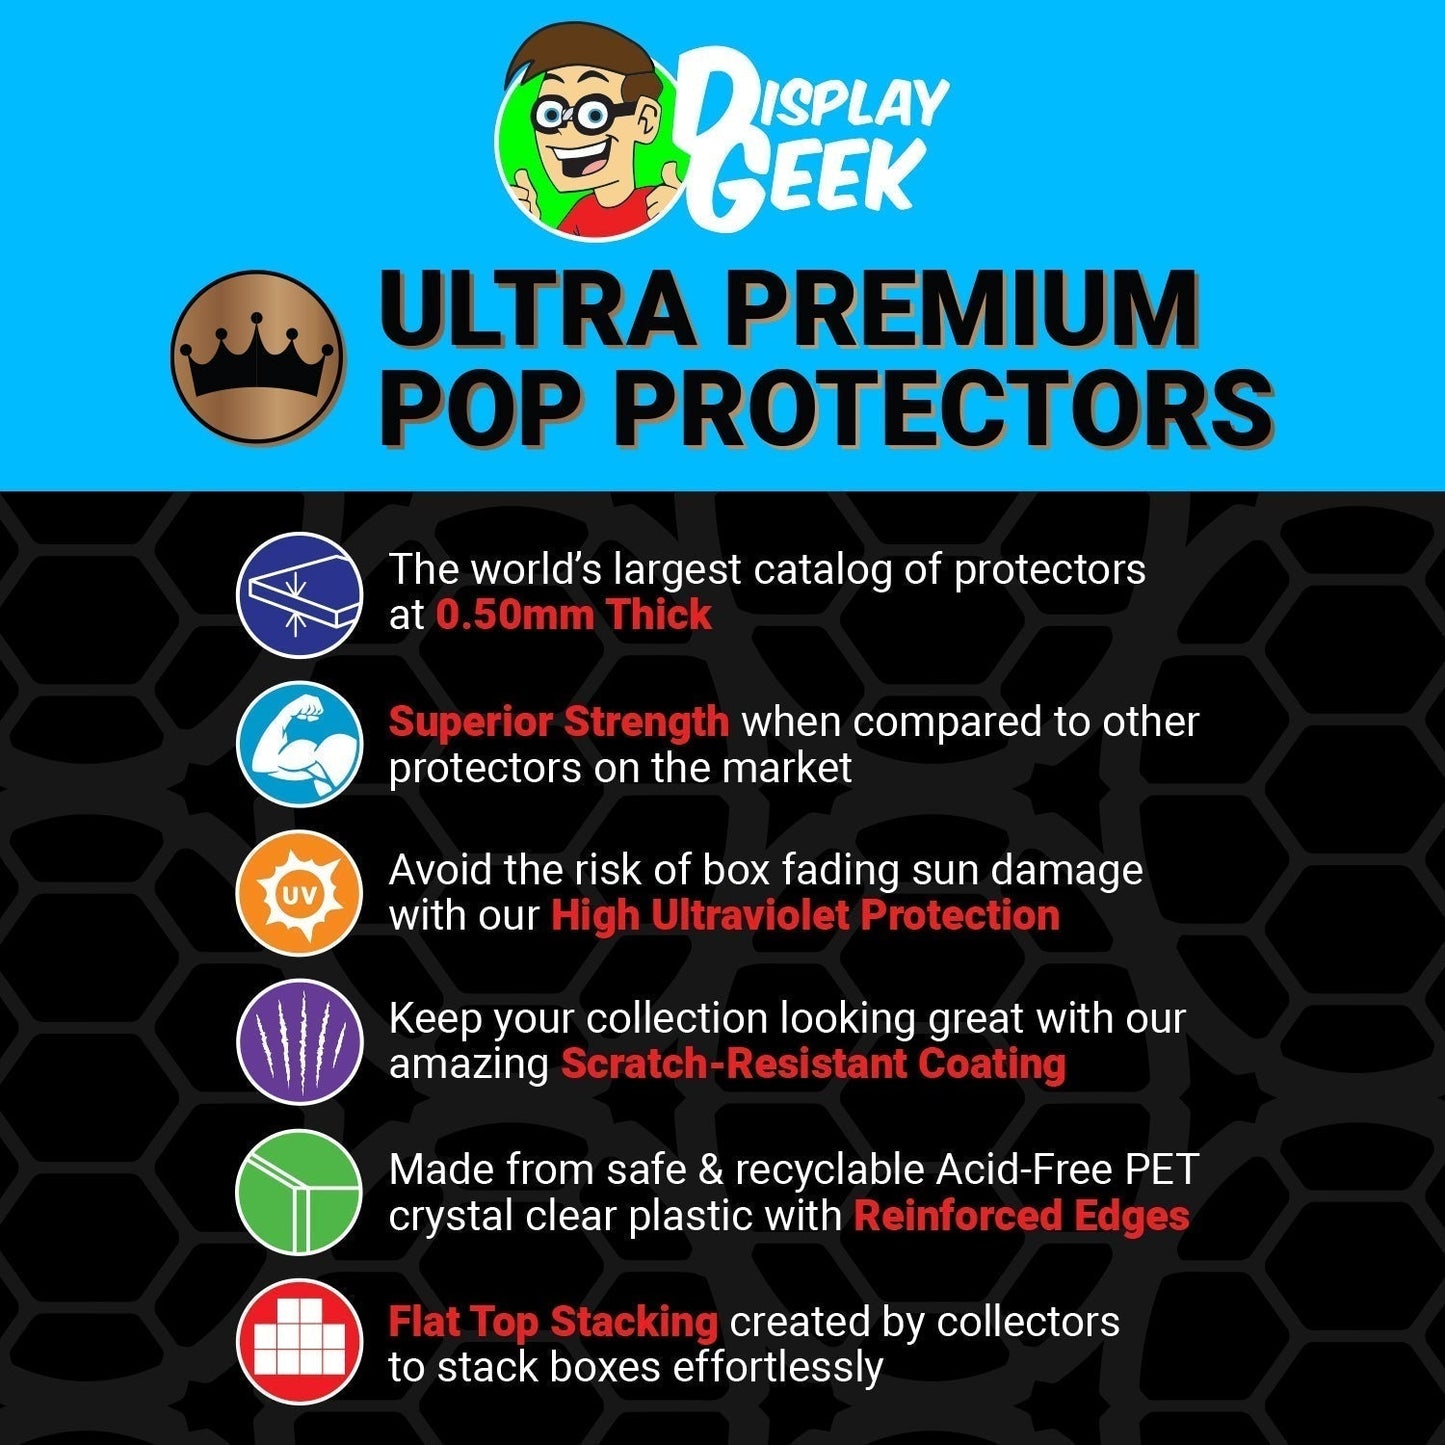 Pop Protector for Bearbrick Red D-Con FunkO's Cereal Box - PPG Pop Protector Guide Search Created by Display Geek